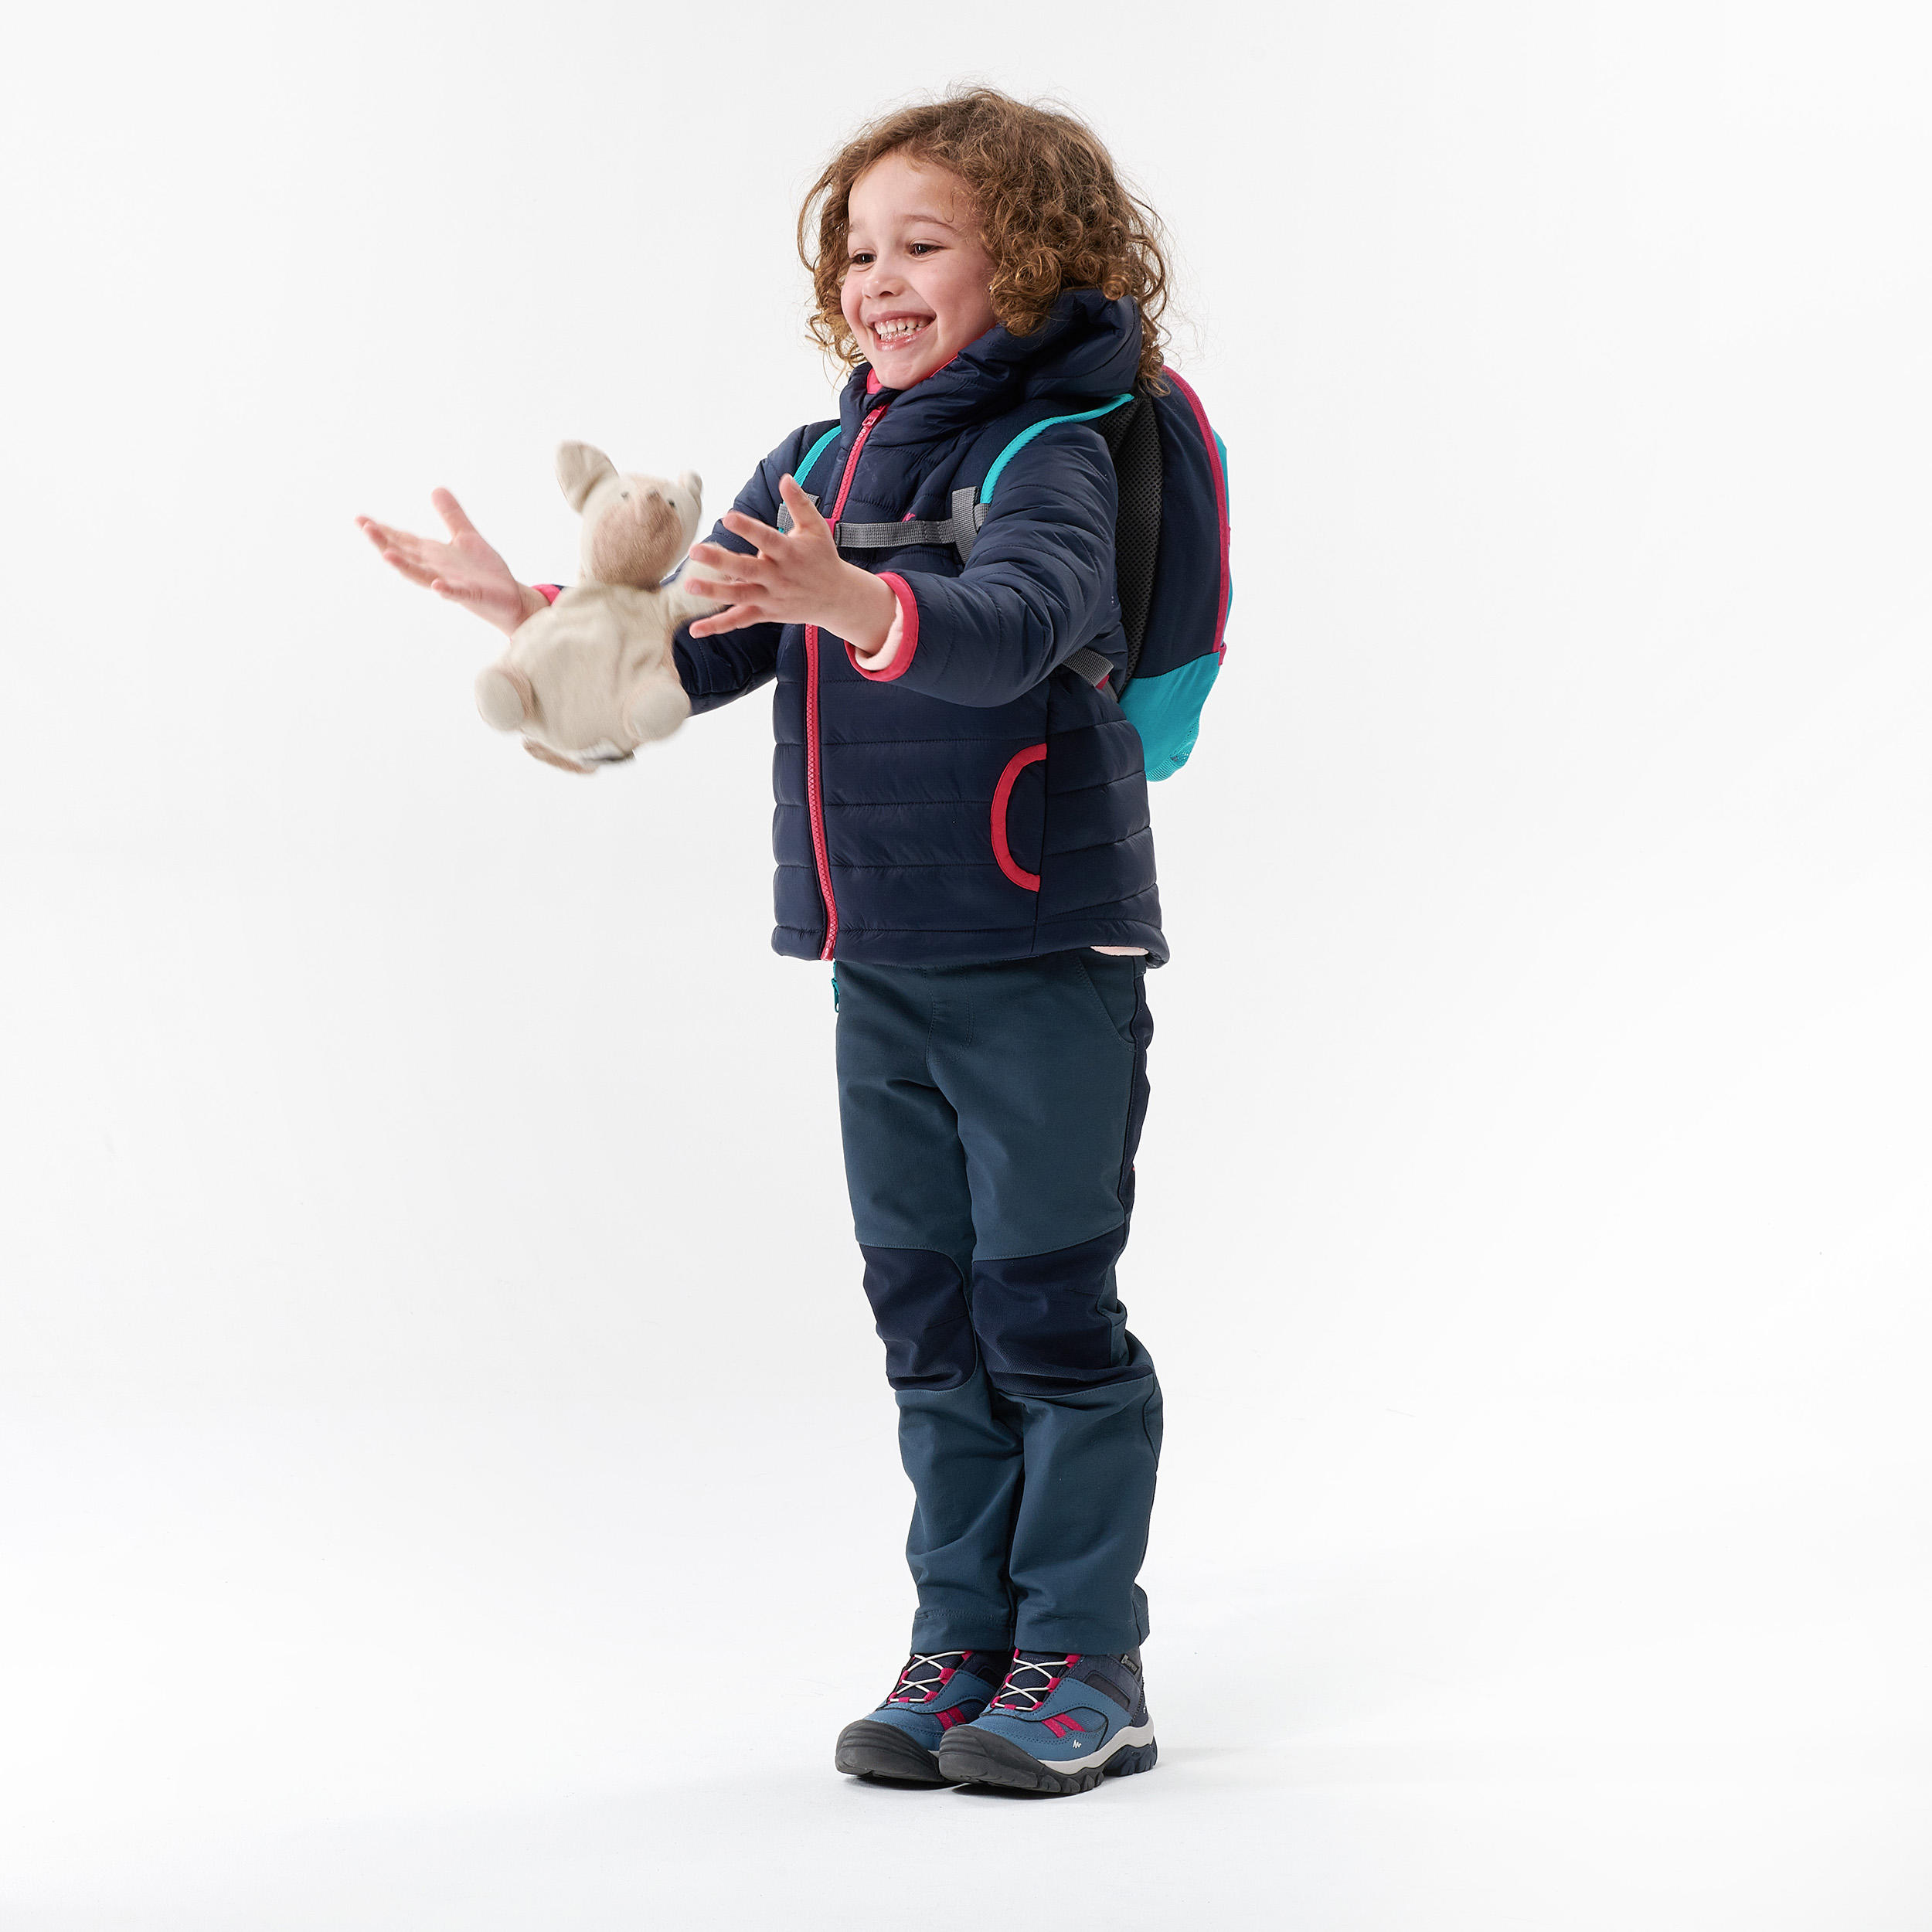 Kids’ Softshell Hiking Trousers - MH550 - Aged 2-6 - Grey 5/6